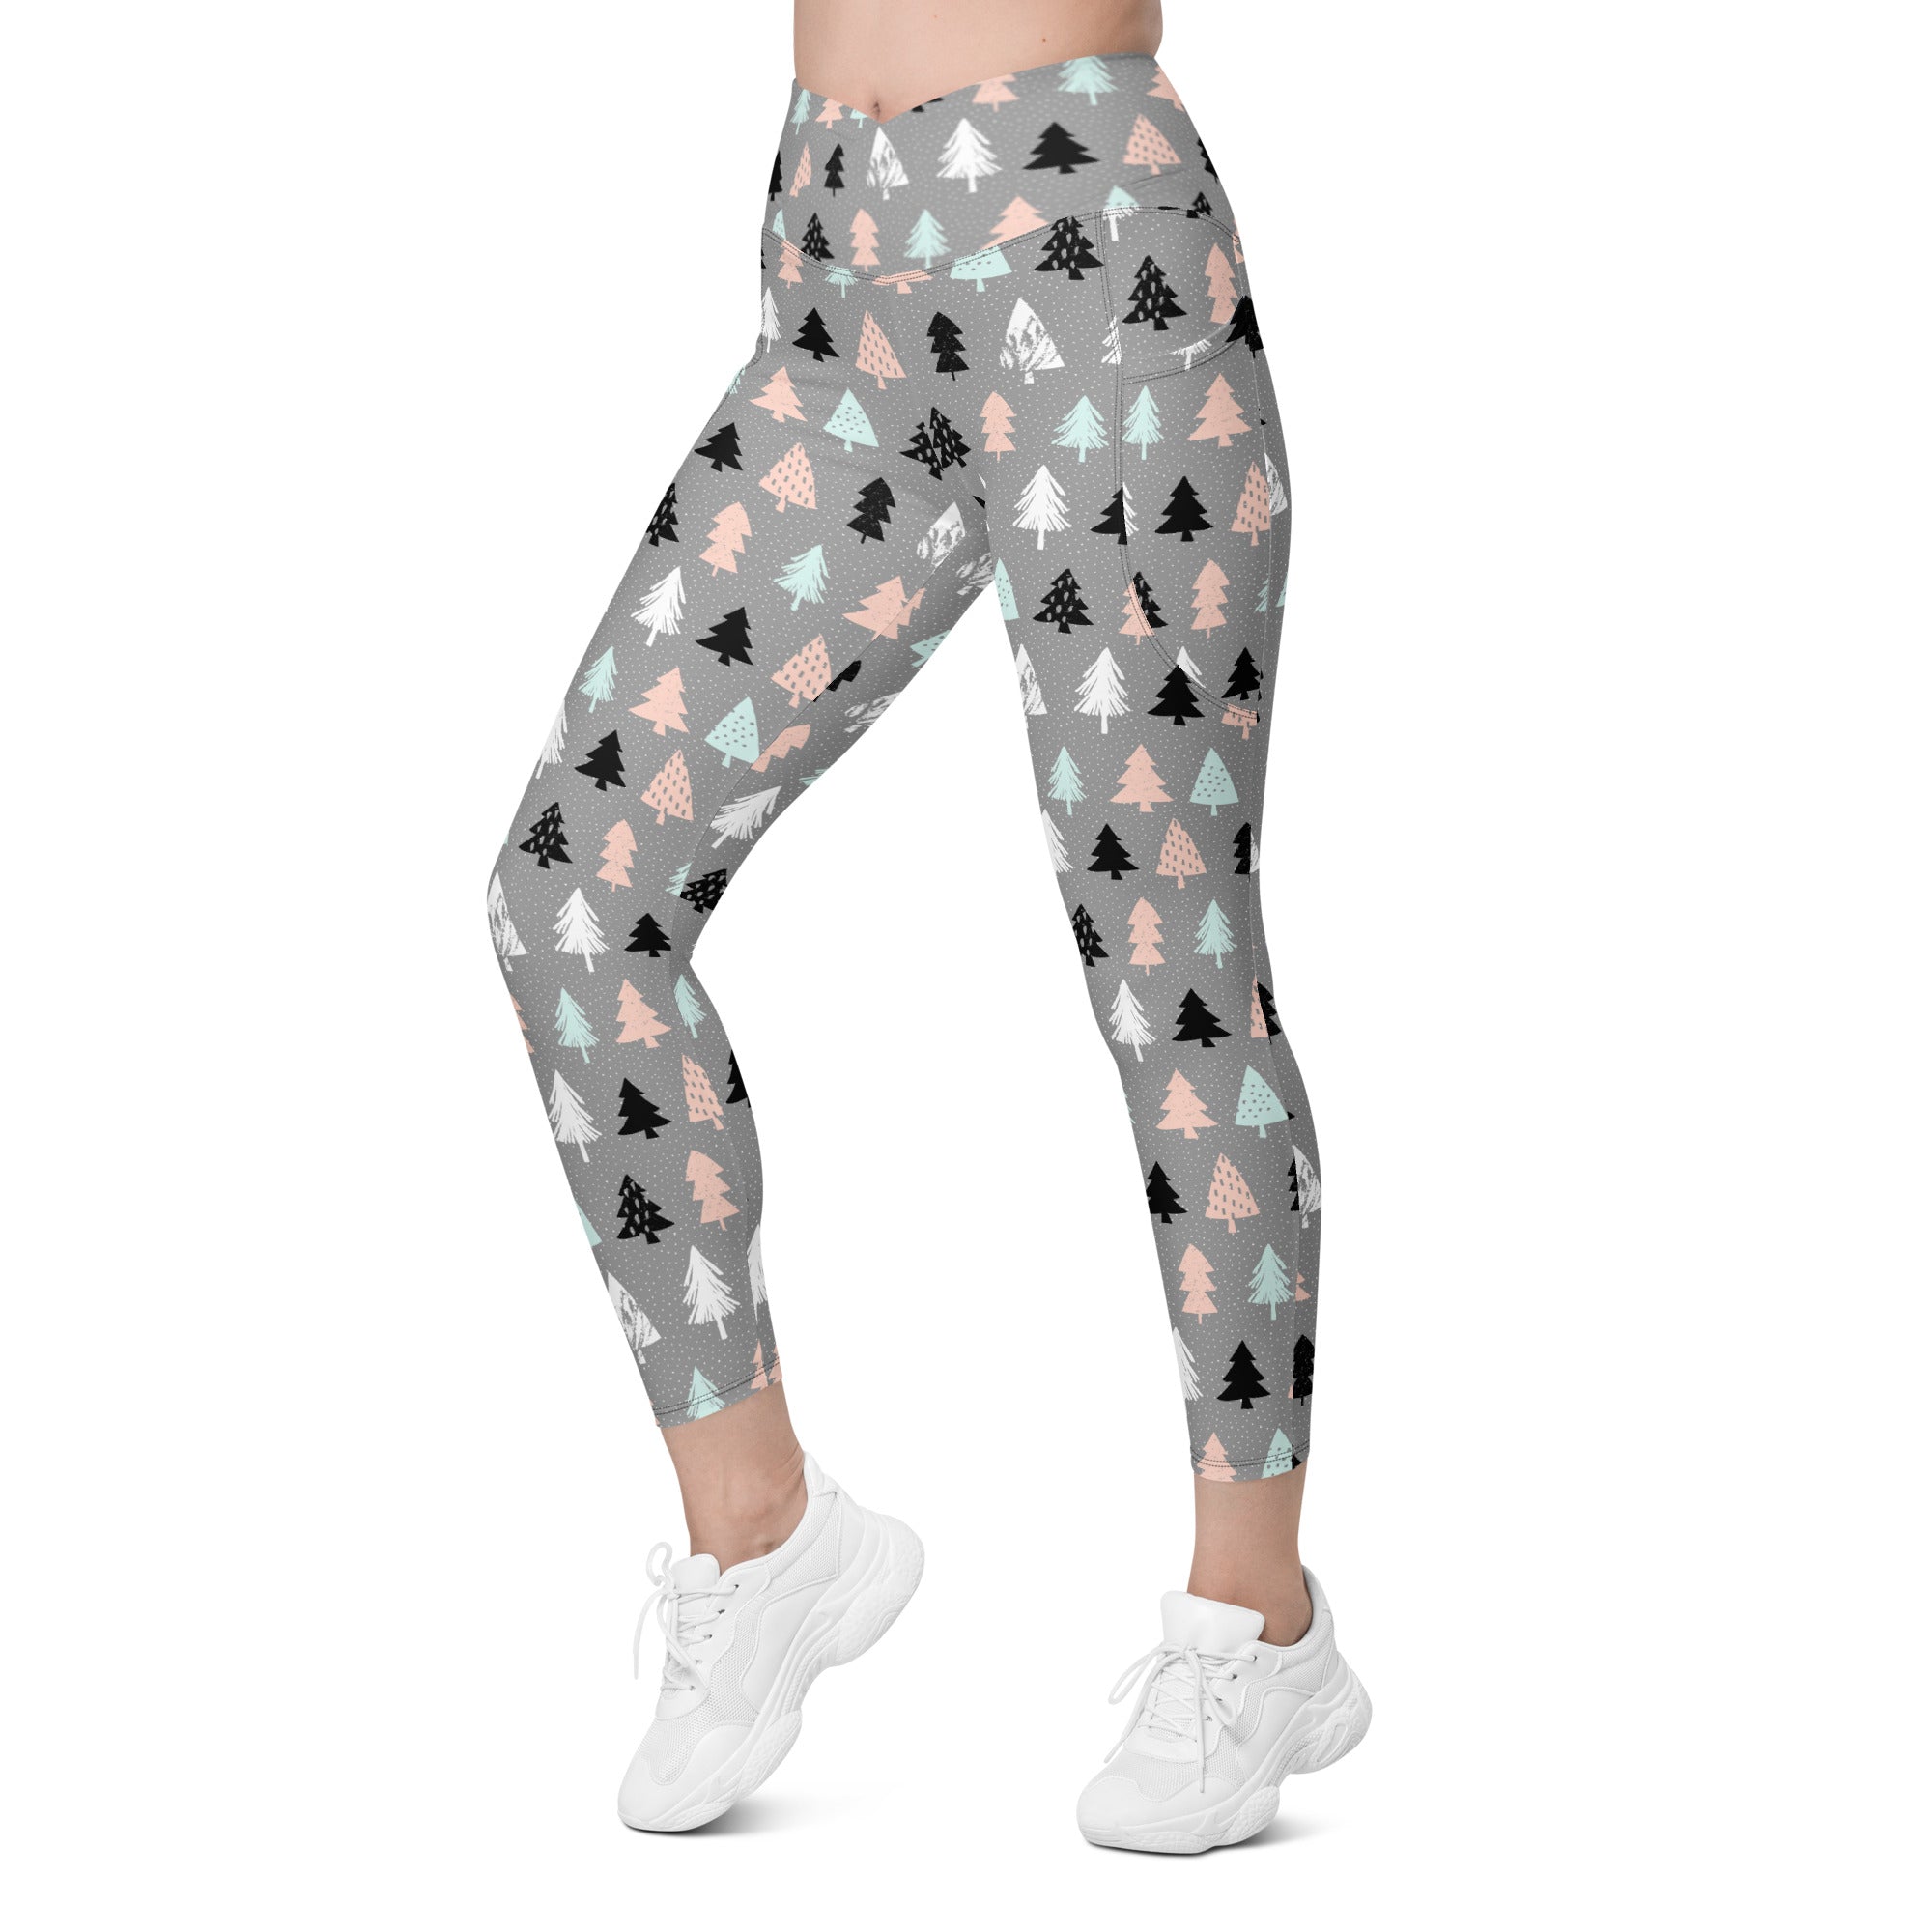 Cute Minimalistic Christmas Crossover Leggings With Pockets